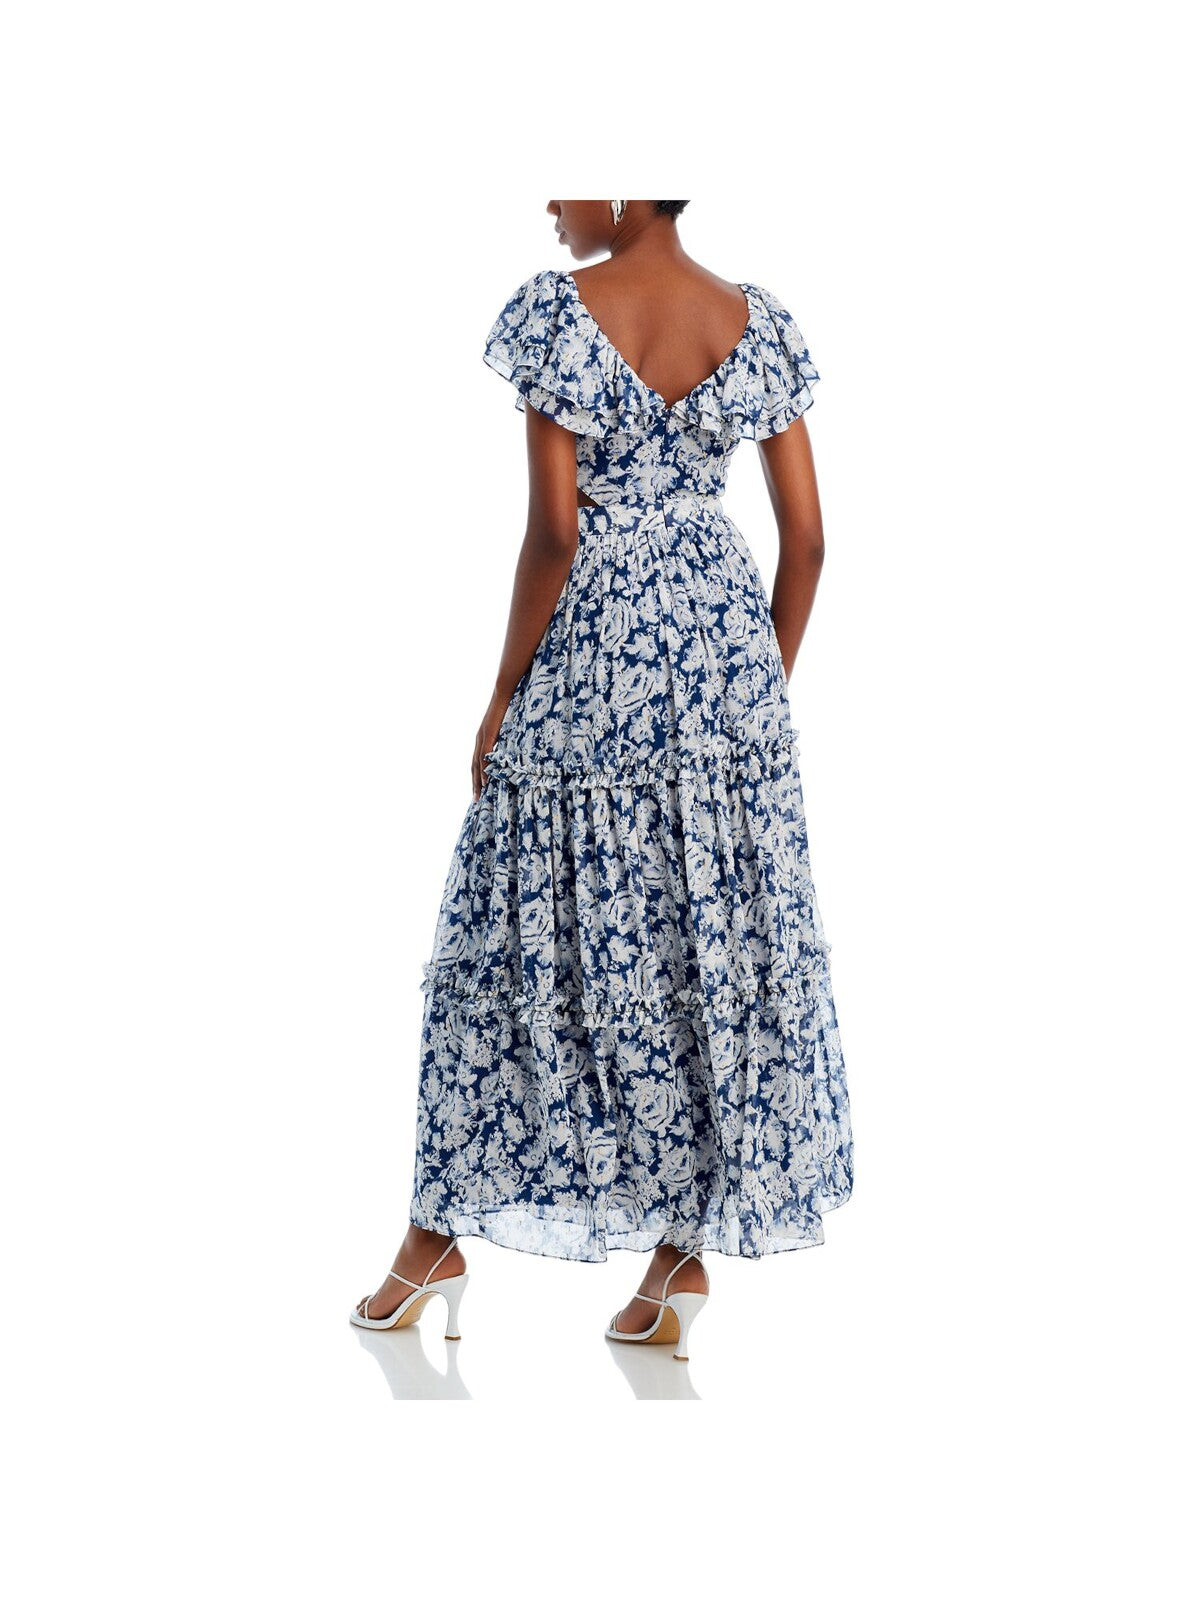 AQUA Womens Navy Cut Out Zippered Gathered Ruffle Tiered Skirt Floral Flutter Sleeve V Neck Maxi Party Fit + Flare Dress XS